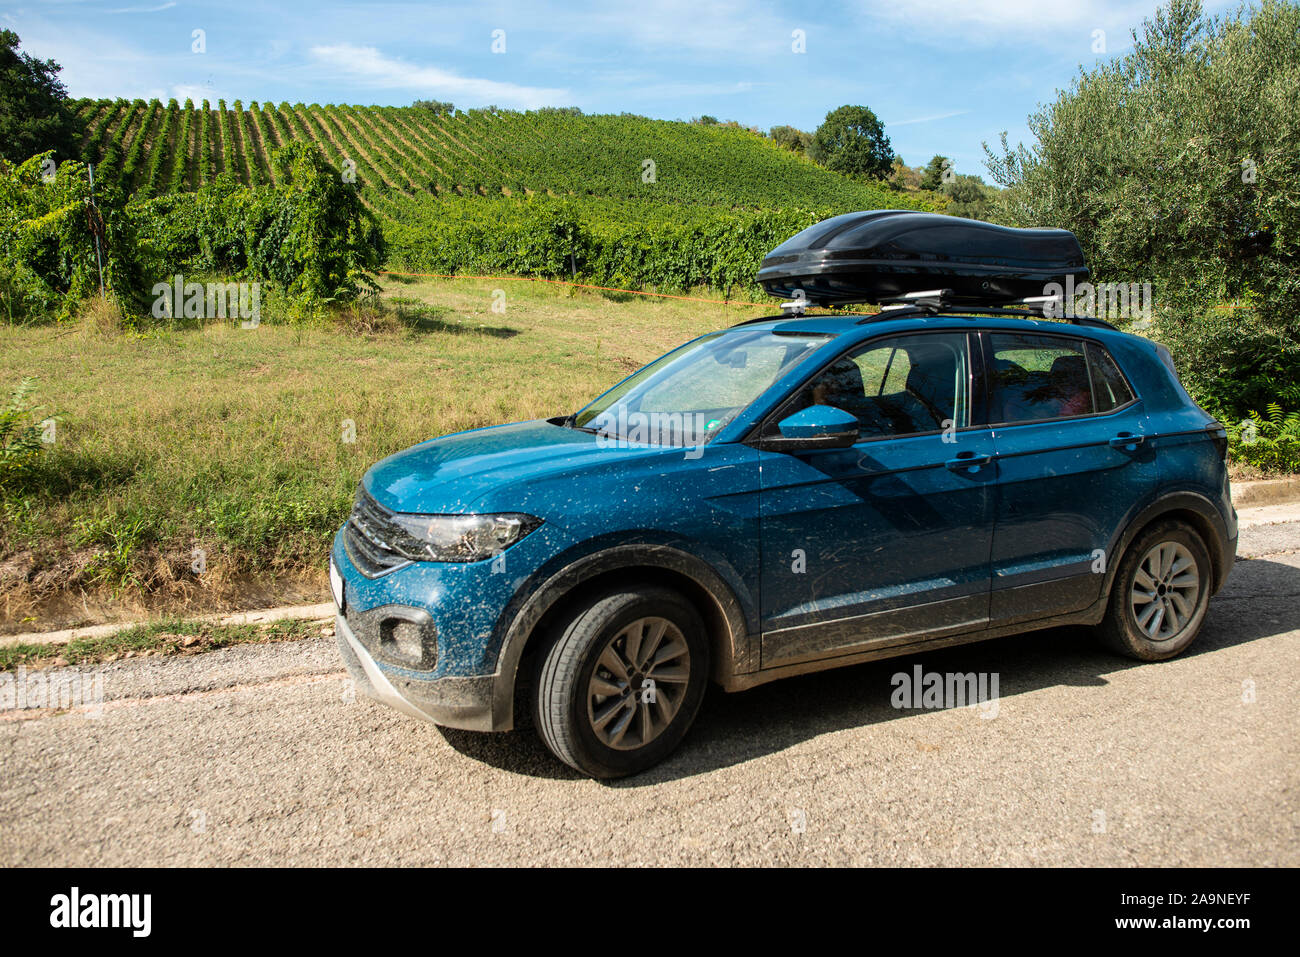 Tourist car in vineyards. Countryside and car with luggage box on top. Rural tourism concept with car and wine grapes on background. Travel concept. Stock Photo